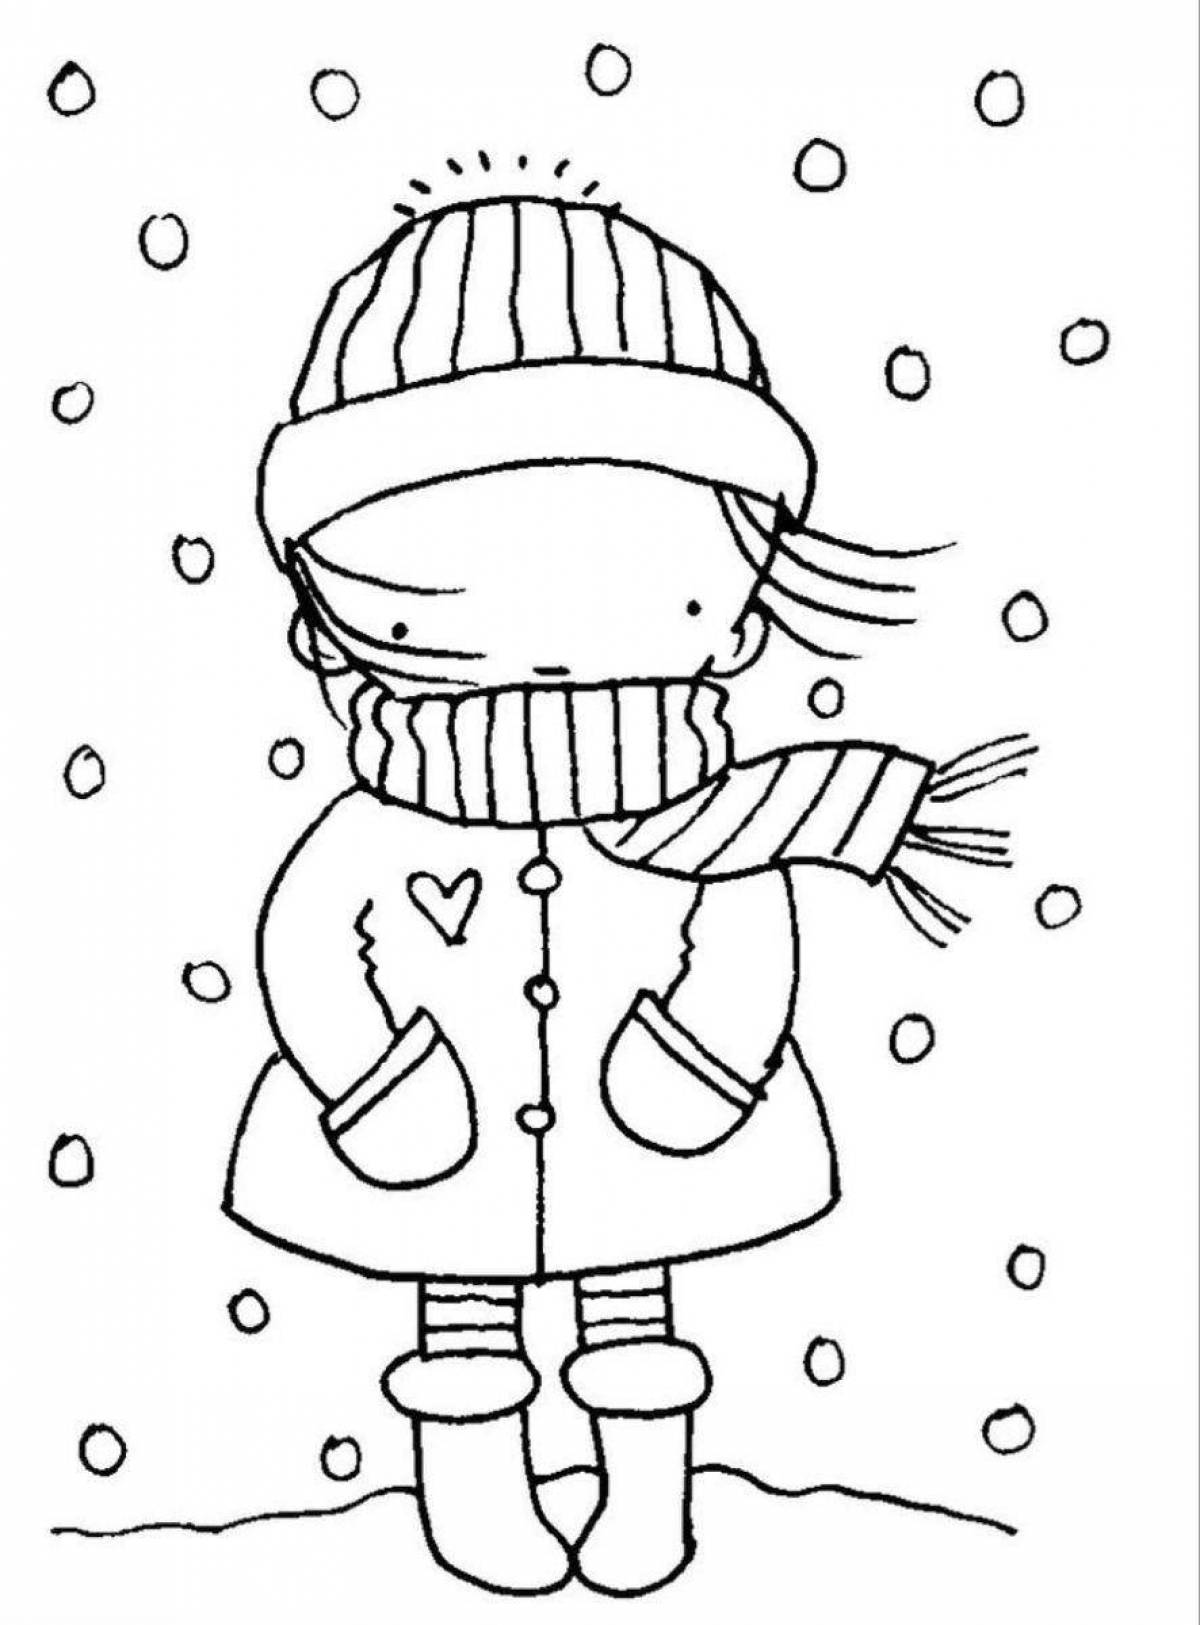 Winter clothes for kids #3